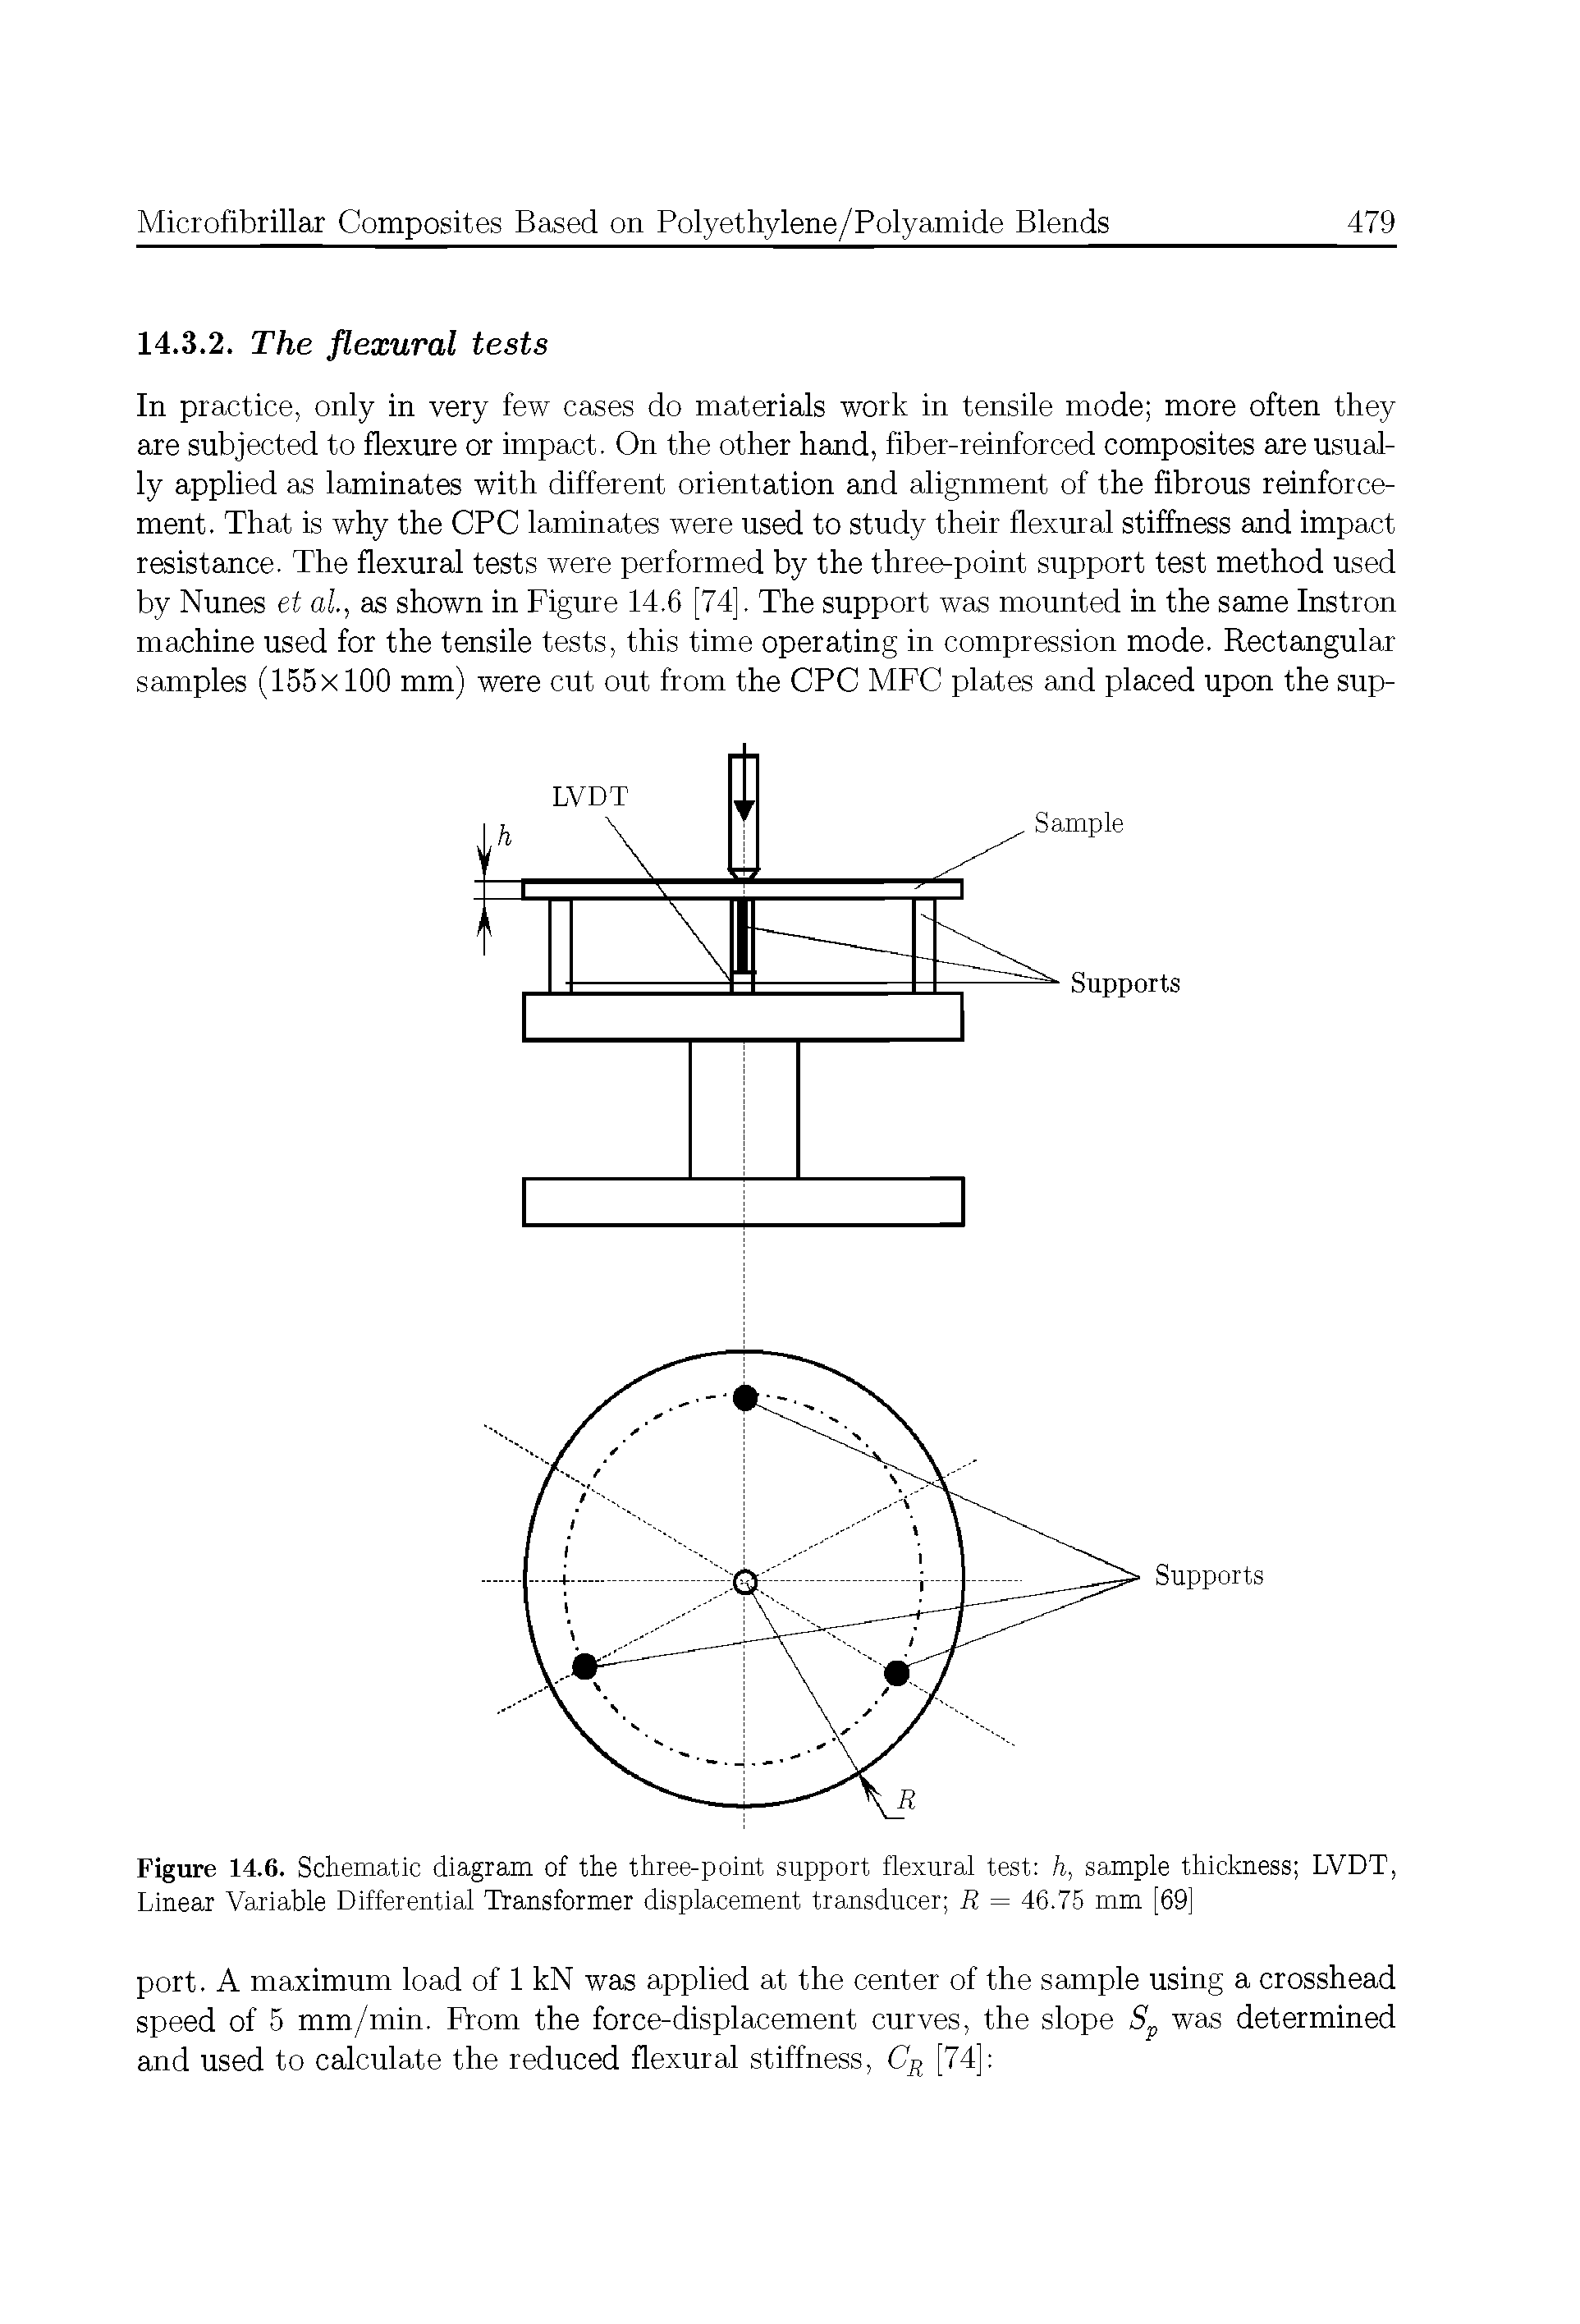 Figure 14.6. Schematic diagram of the three-point support flexural test h, sample thickness LVDT, Linear Variable Differential Transformer displacement transducer R = 46.75 mm [69]...